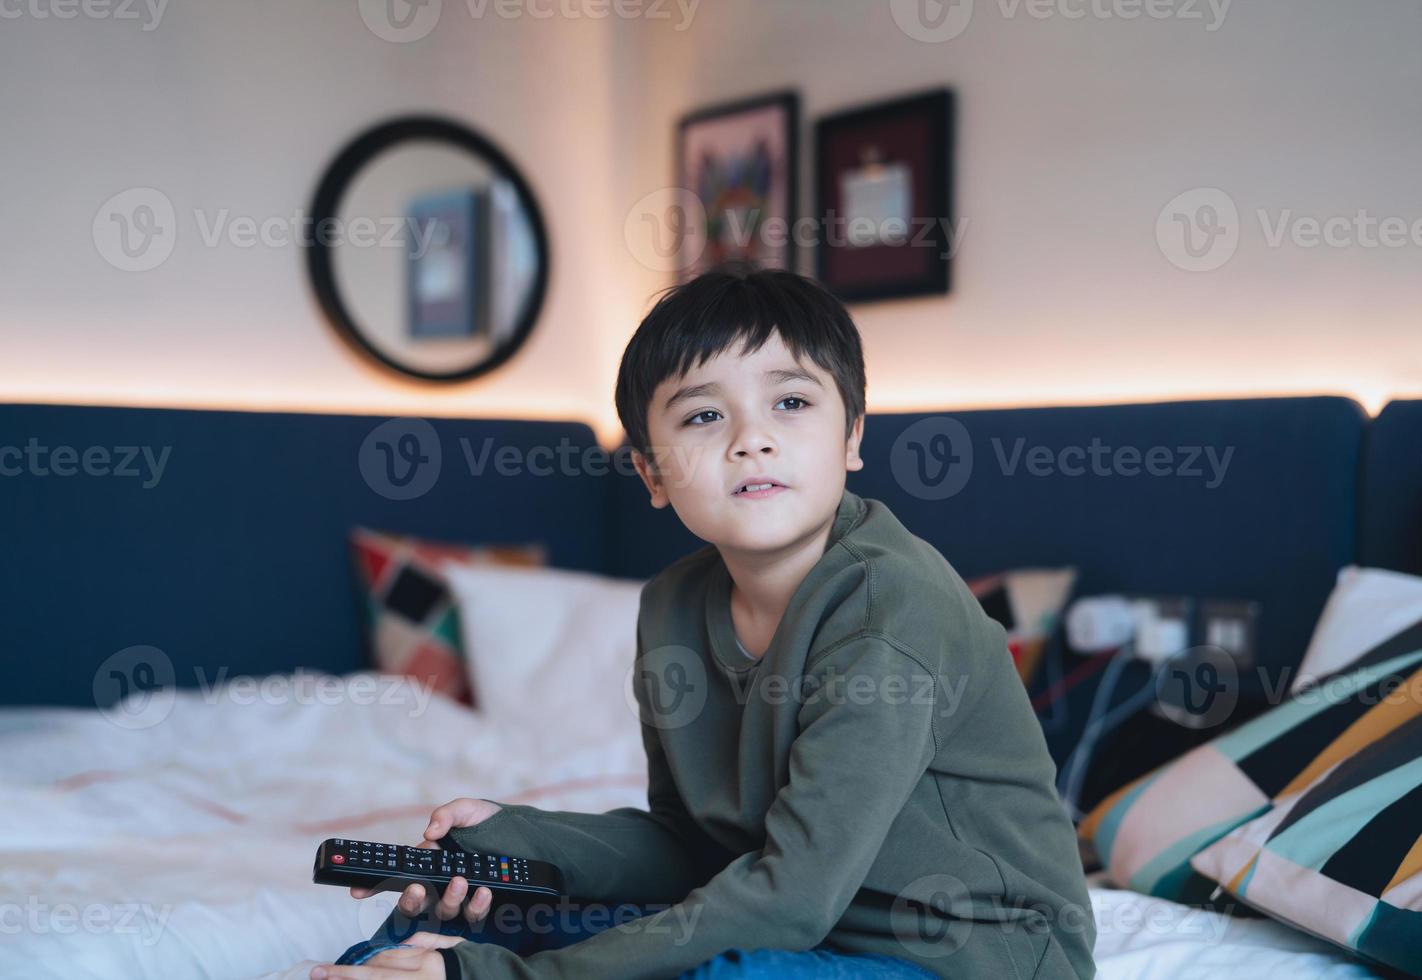 Happy young boy sitting in bed holding remote control, Cute Kid looking out with smiling face, Child relaxing at home watching TV in bed room. photo